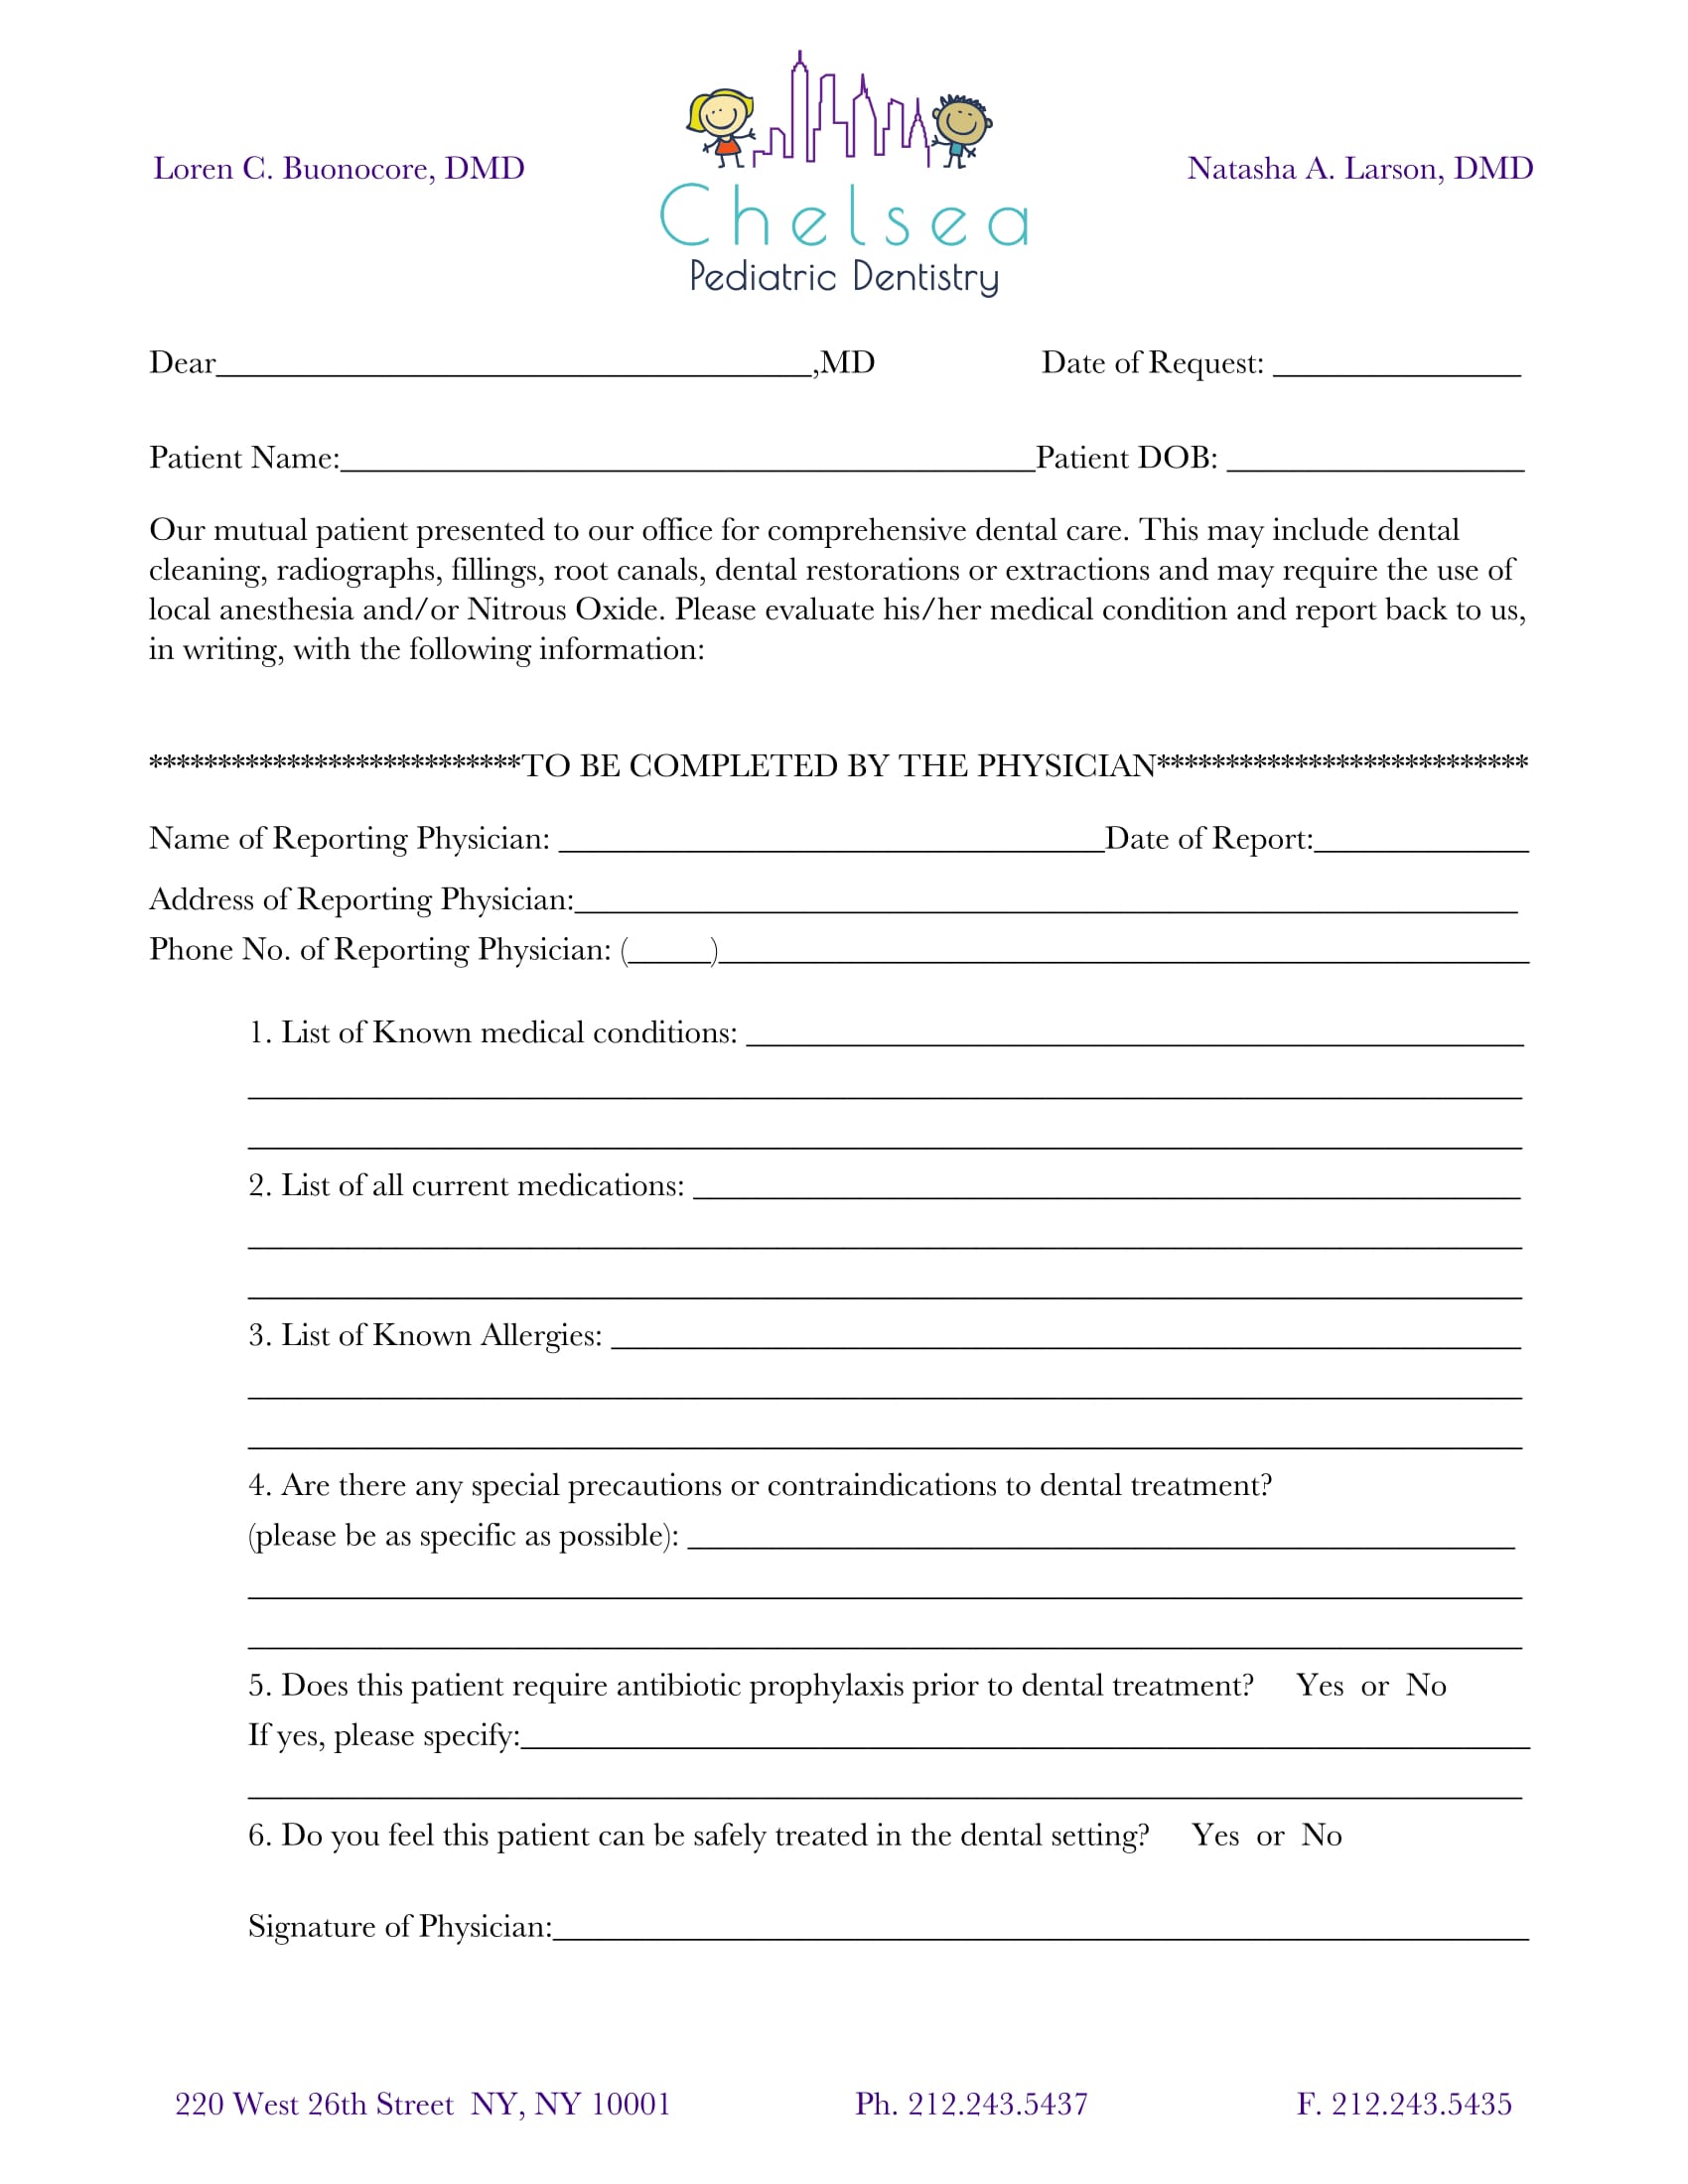 pediatric dentistry medical clearance form 1